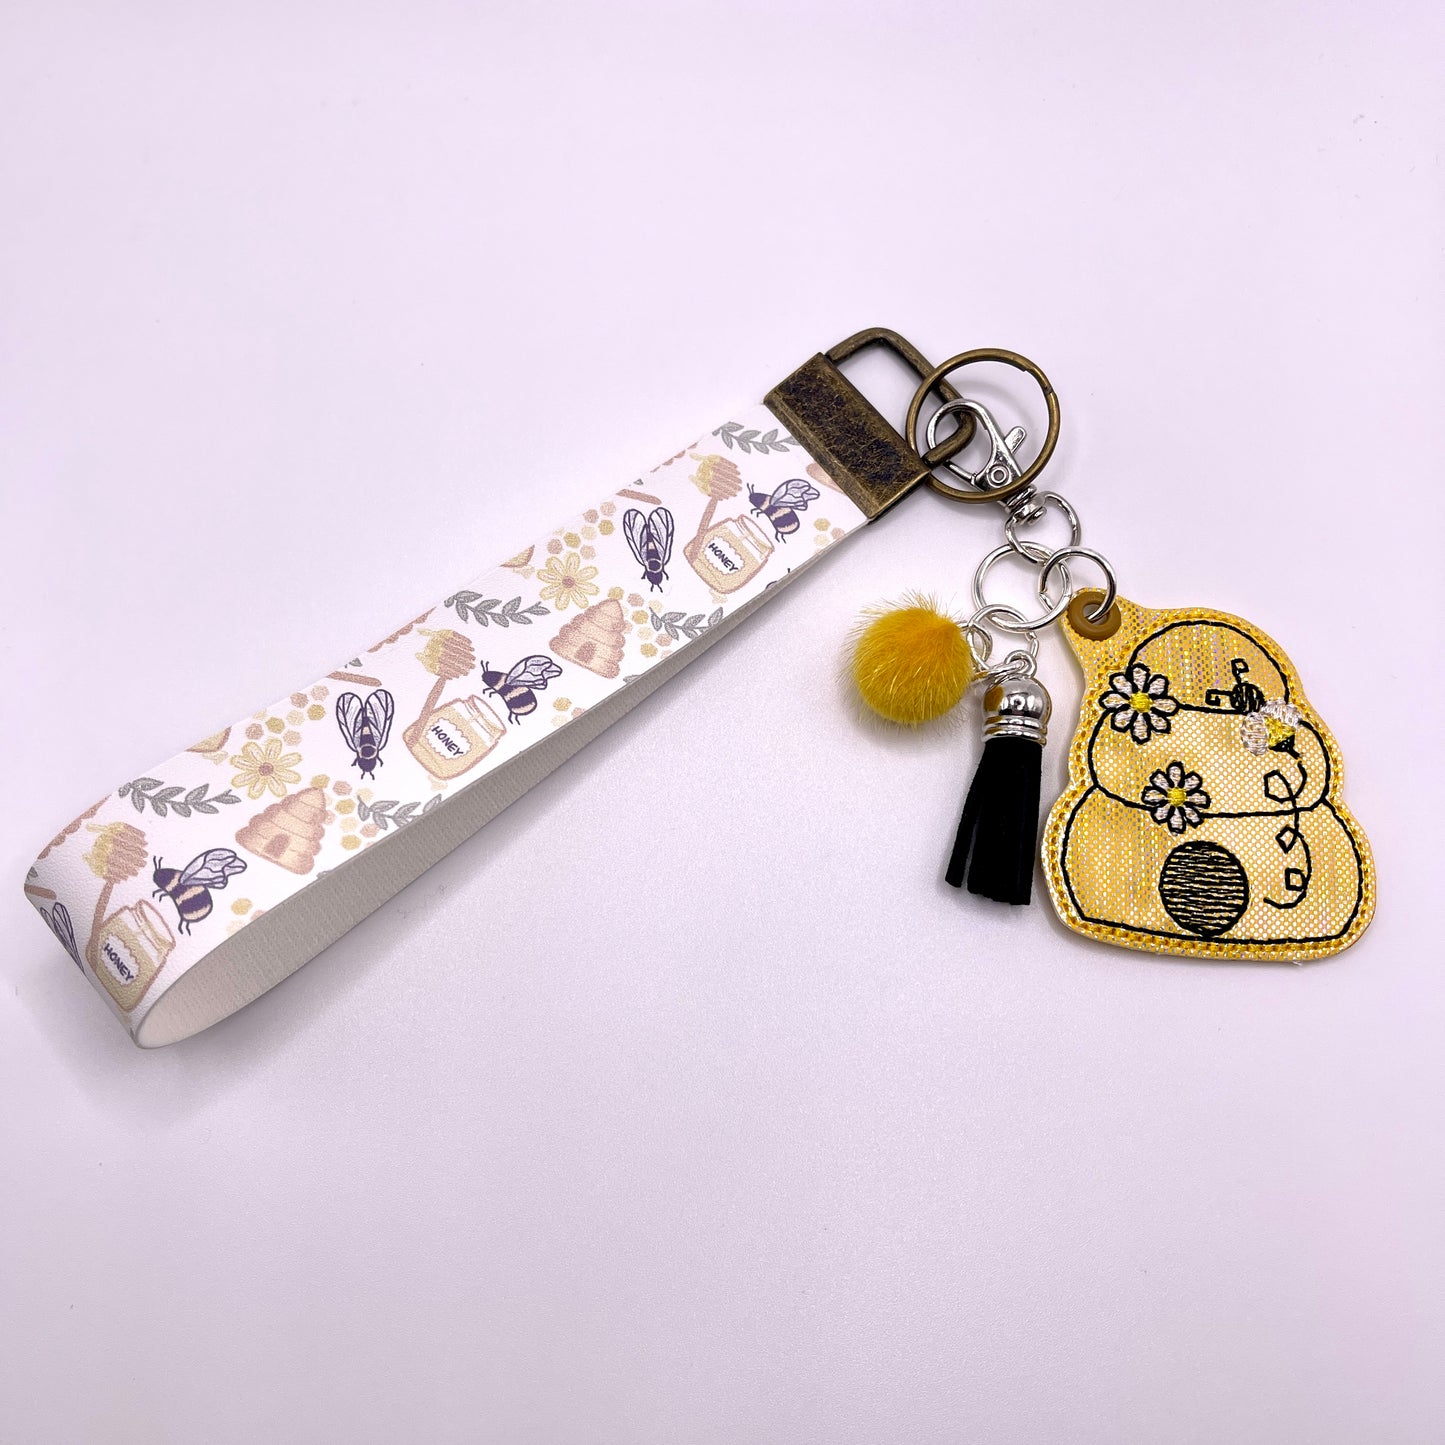 Beehive Keychain and Wristlet